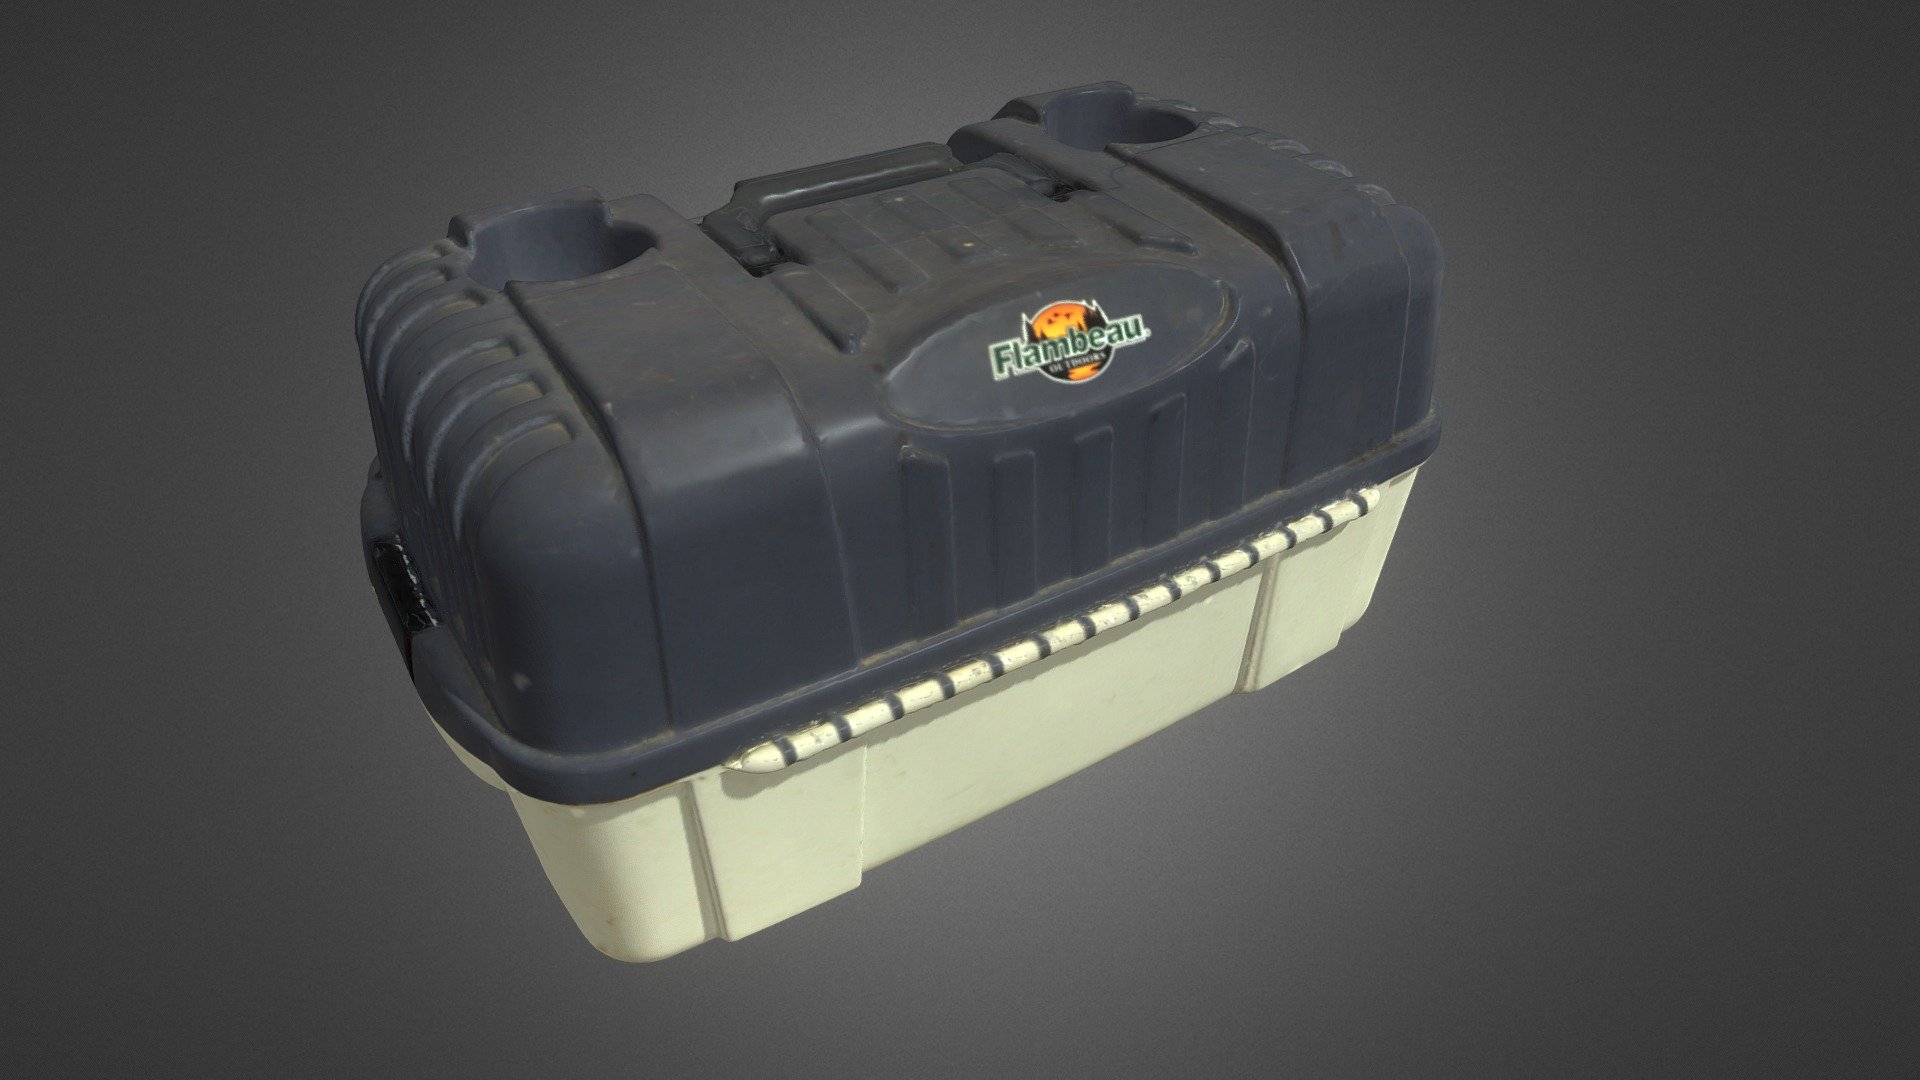 3D scanned Flambeau tackle box. Really great asset for the right seen. Nice and dirty too!

Includes

3D


.obj
.fbx
.max(2020)

2D


DIFFUSE
ROUGHESS

If you have any issues please reach out and I will get back to you ASAP.

- REO CS - Flambeau tackle box - Buy Royalty Free 3D model by Reo Creative Scanning (@ReoCreativeScanning) 3d model